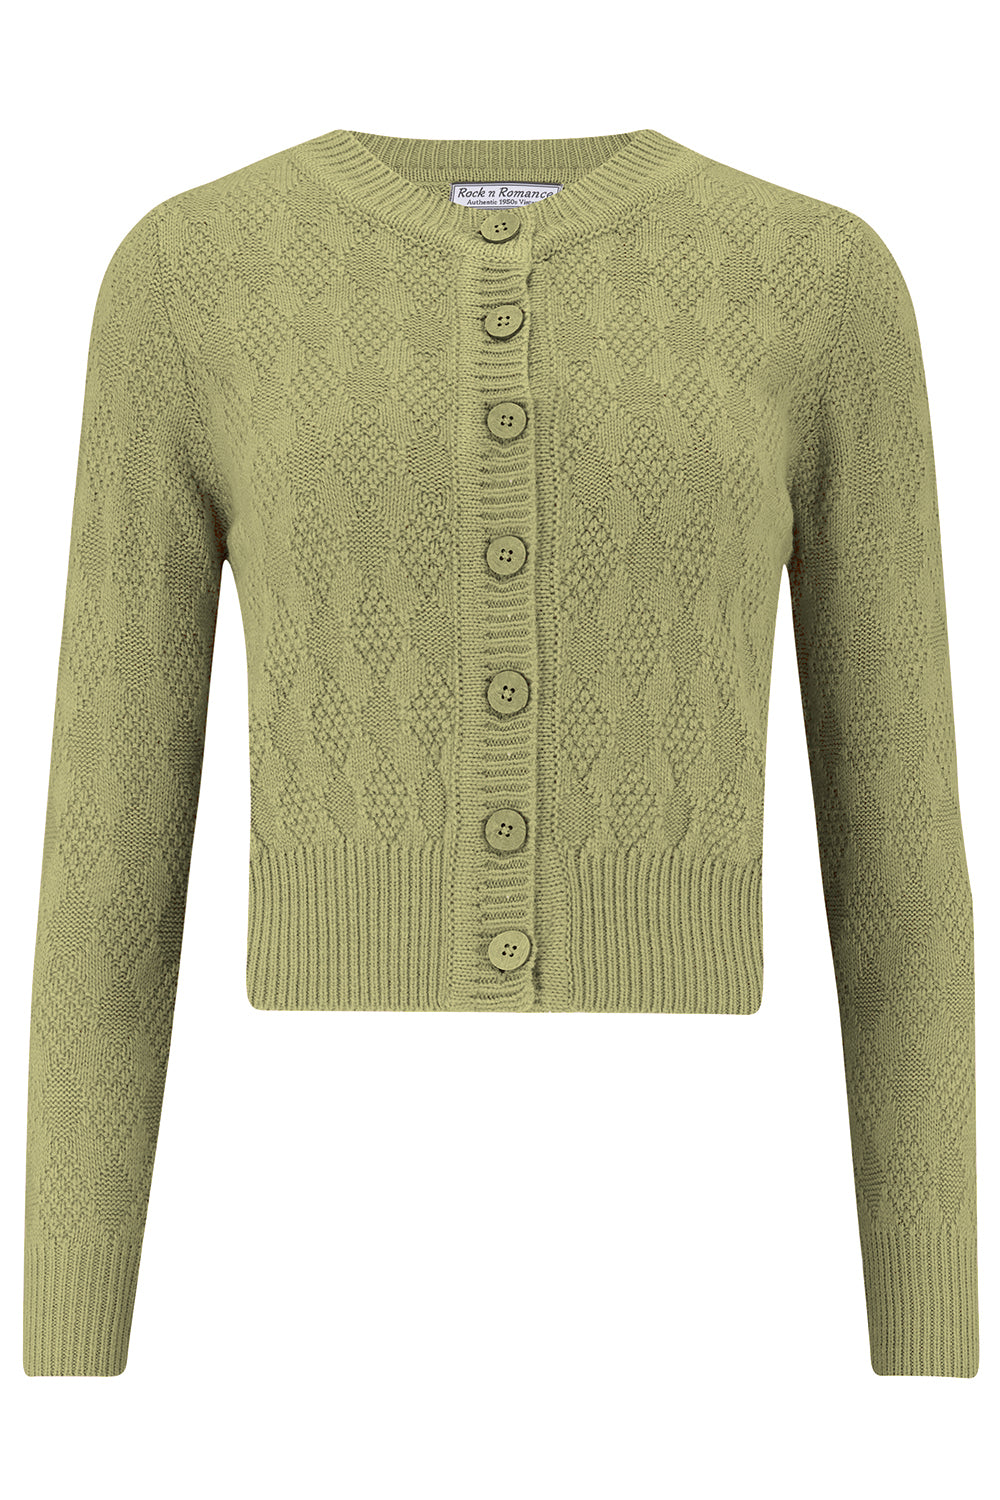 The "Sandra" Textured Diamond Knit Cardigan in Sage Green, 1940s & 50s Vintage Style product